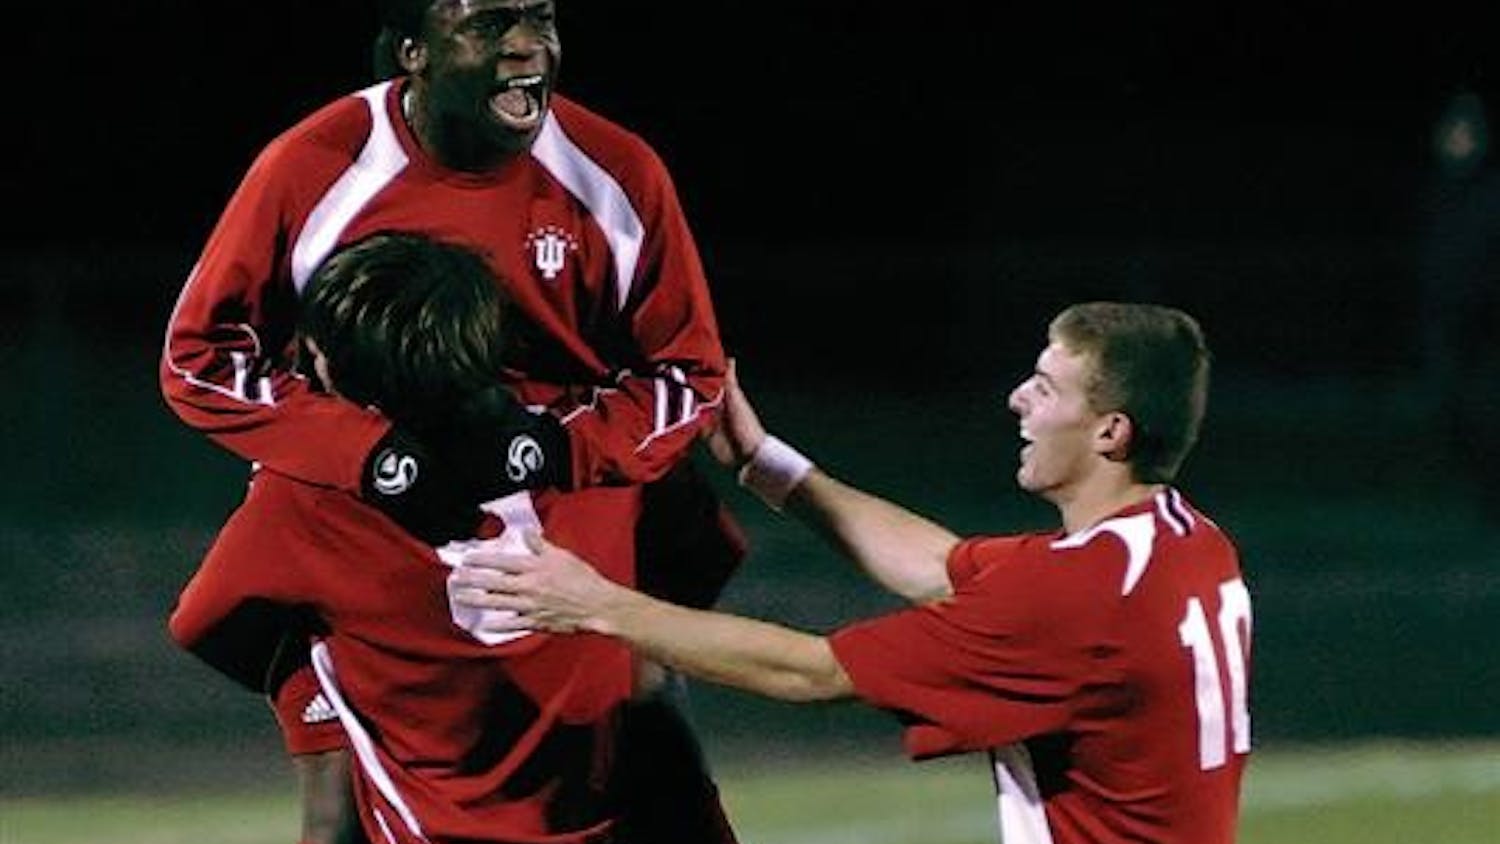 Senior midfielder John Mellencamp (8) celebrates with teammates Ofori Sarkodie and Andy Adlard (10) following Mellencamp's goal in the 18th minute of the Hoosier's 2-0 win over St. Louis on Tuesday night at Bill Armstrong Stadium. IU advances to the third round of the NCAA tournament where the team will play host to Michigan at 7 p.m. Saturday.